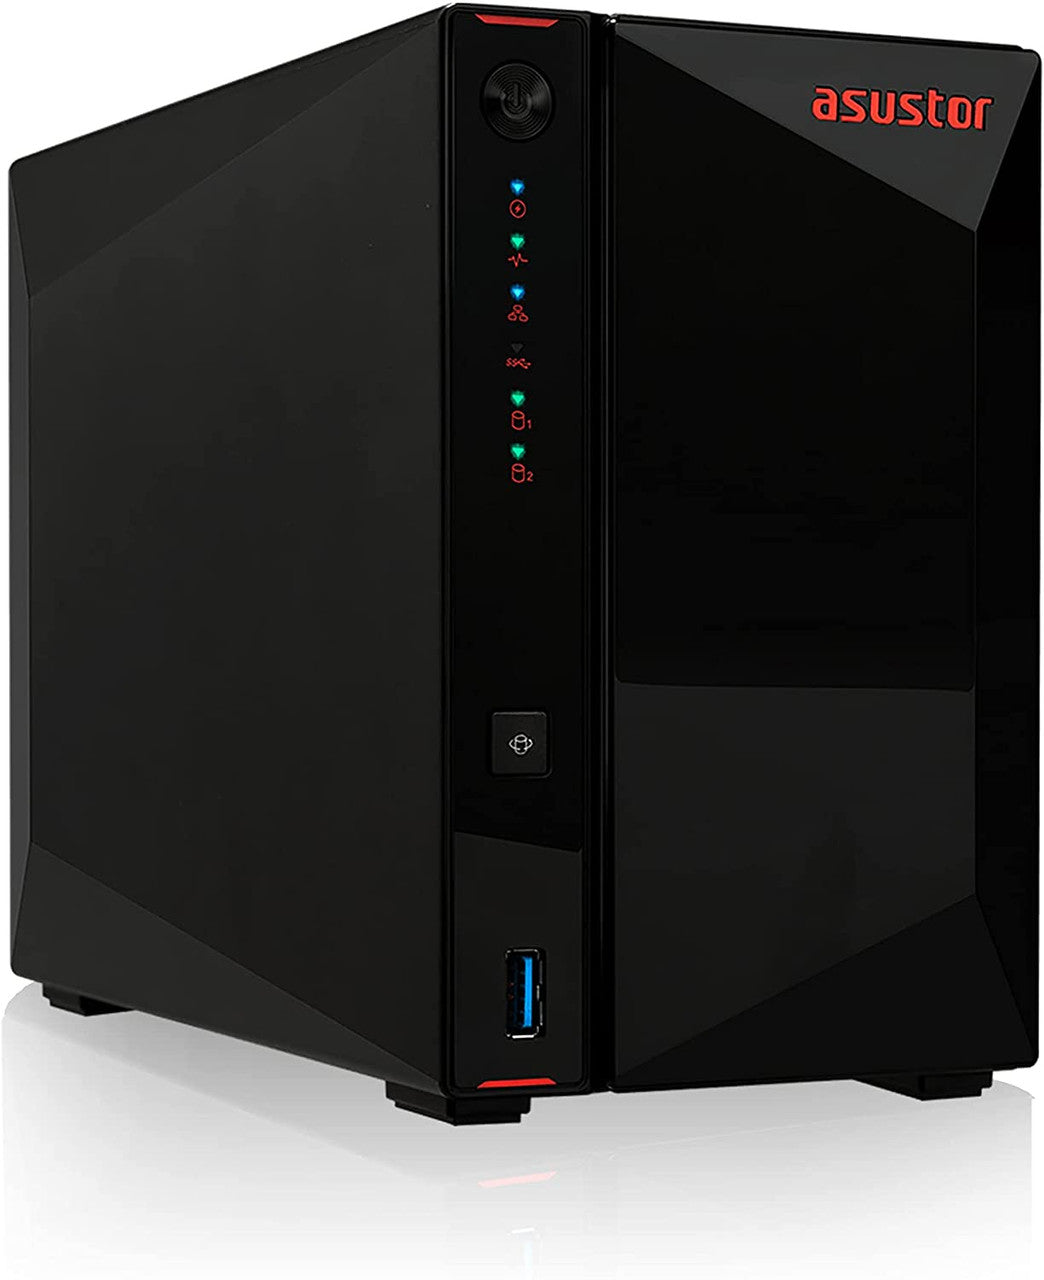 Asustor AS5202T 2-Bay Nimbustor 2 NAS with 8GB RAM and 40TB (2 x 20TB) Seagate Ironwolf PRO Drives Fully Assembled and Tested